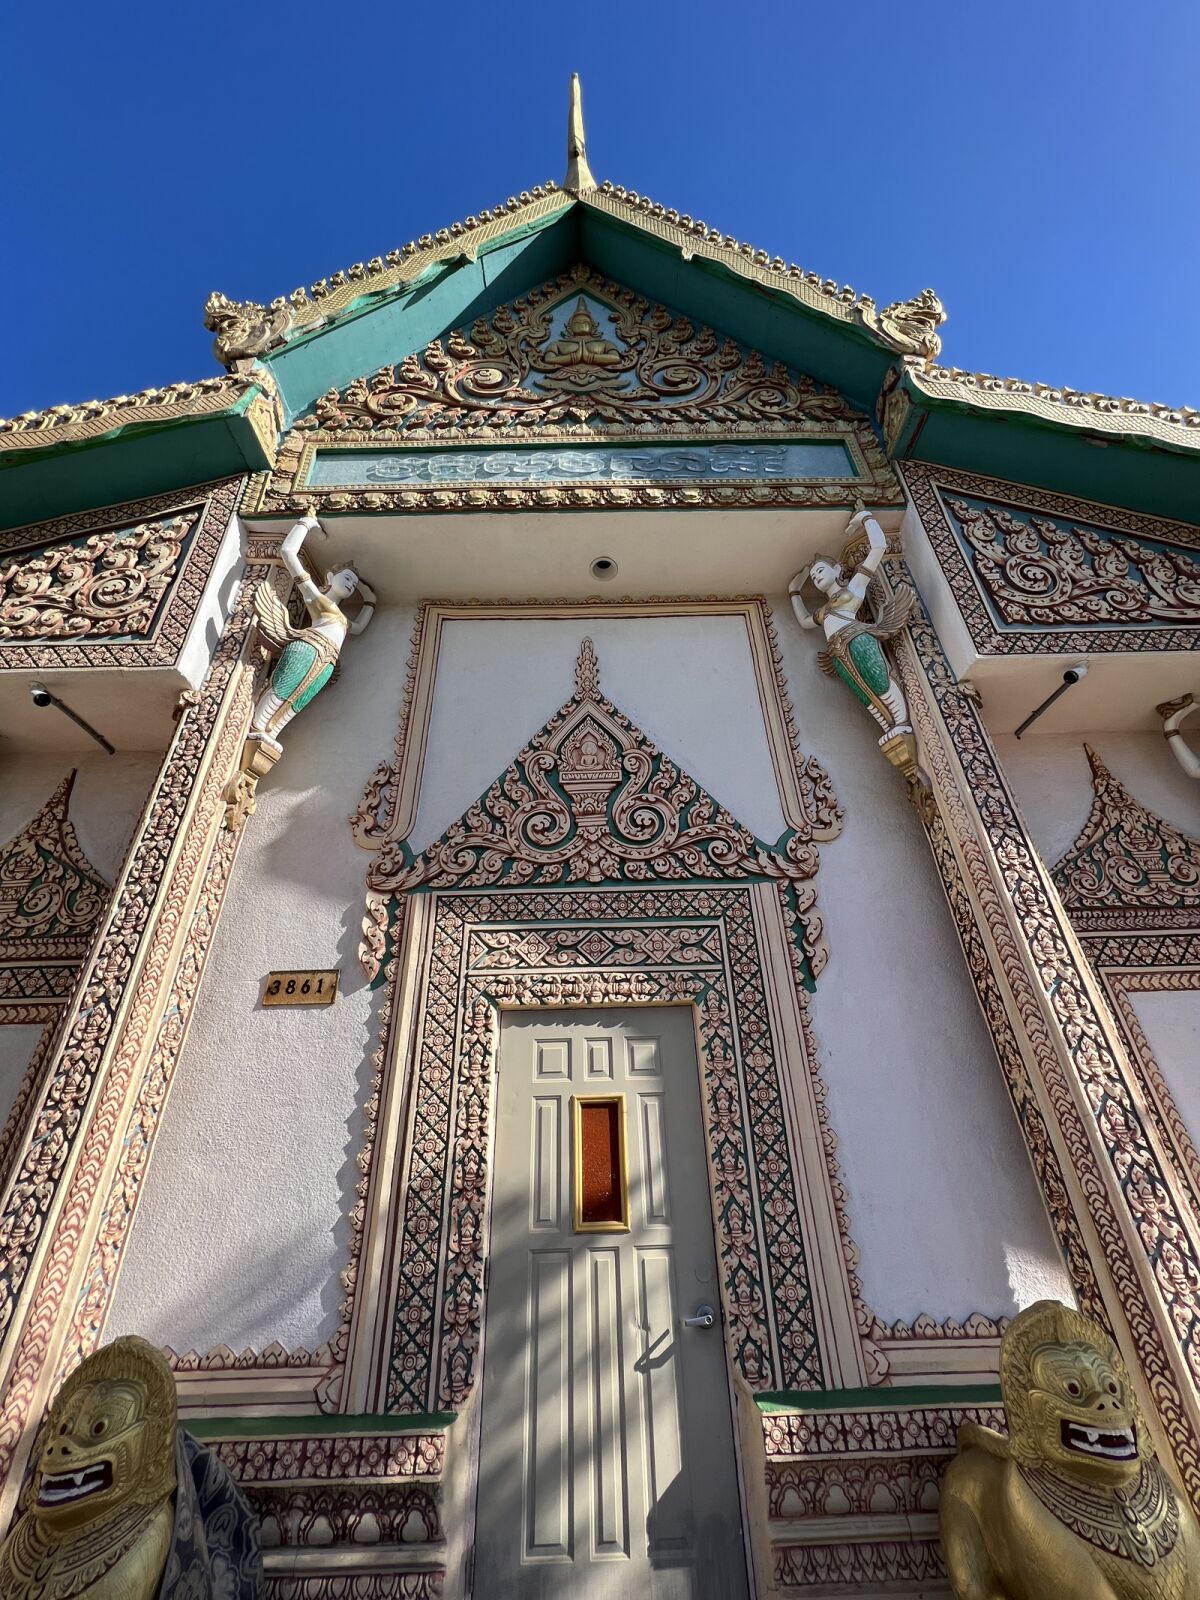 The exterior of the Sovannkiry Buddhist Temple in East San Diego.